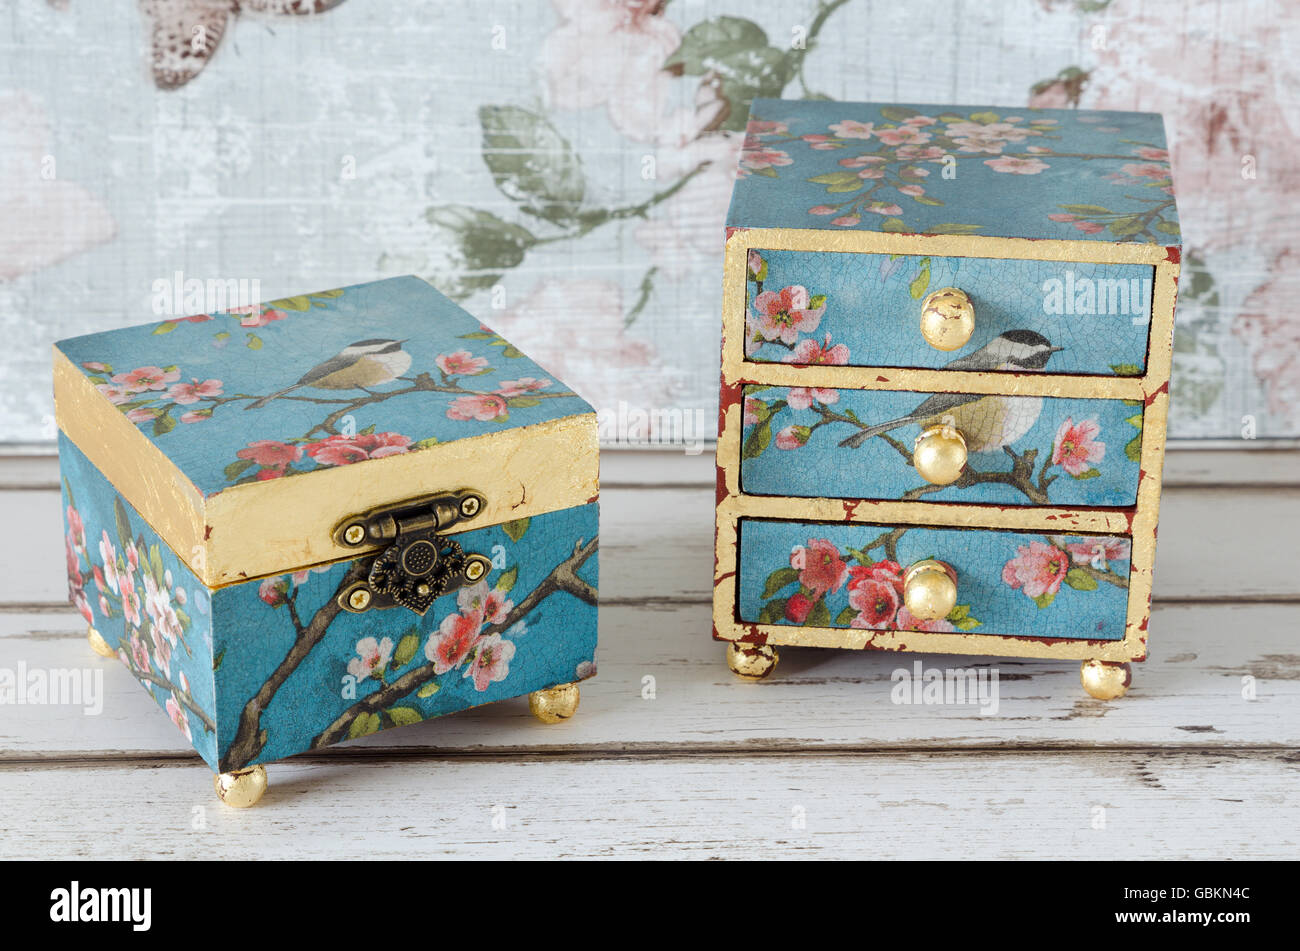 Hnadmade trinket box and mini chest of drawers on a shabby chic background Stock Photo